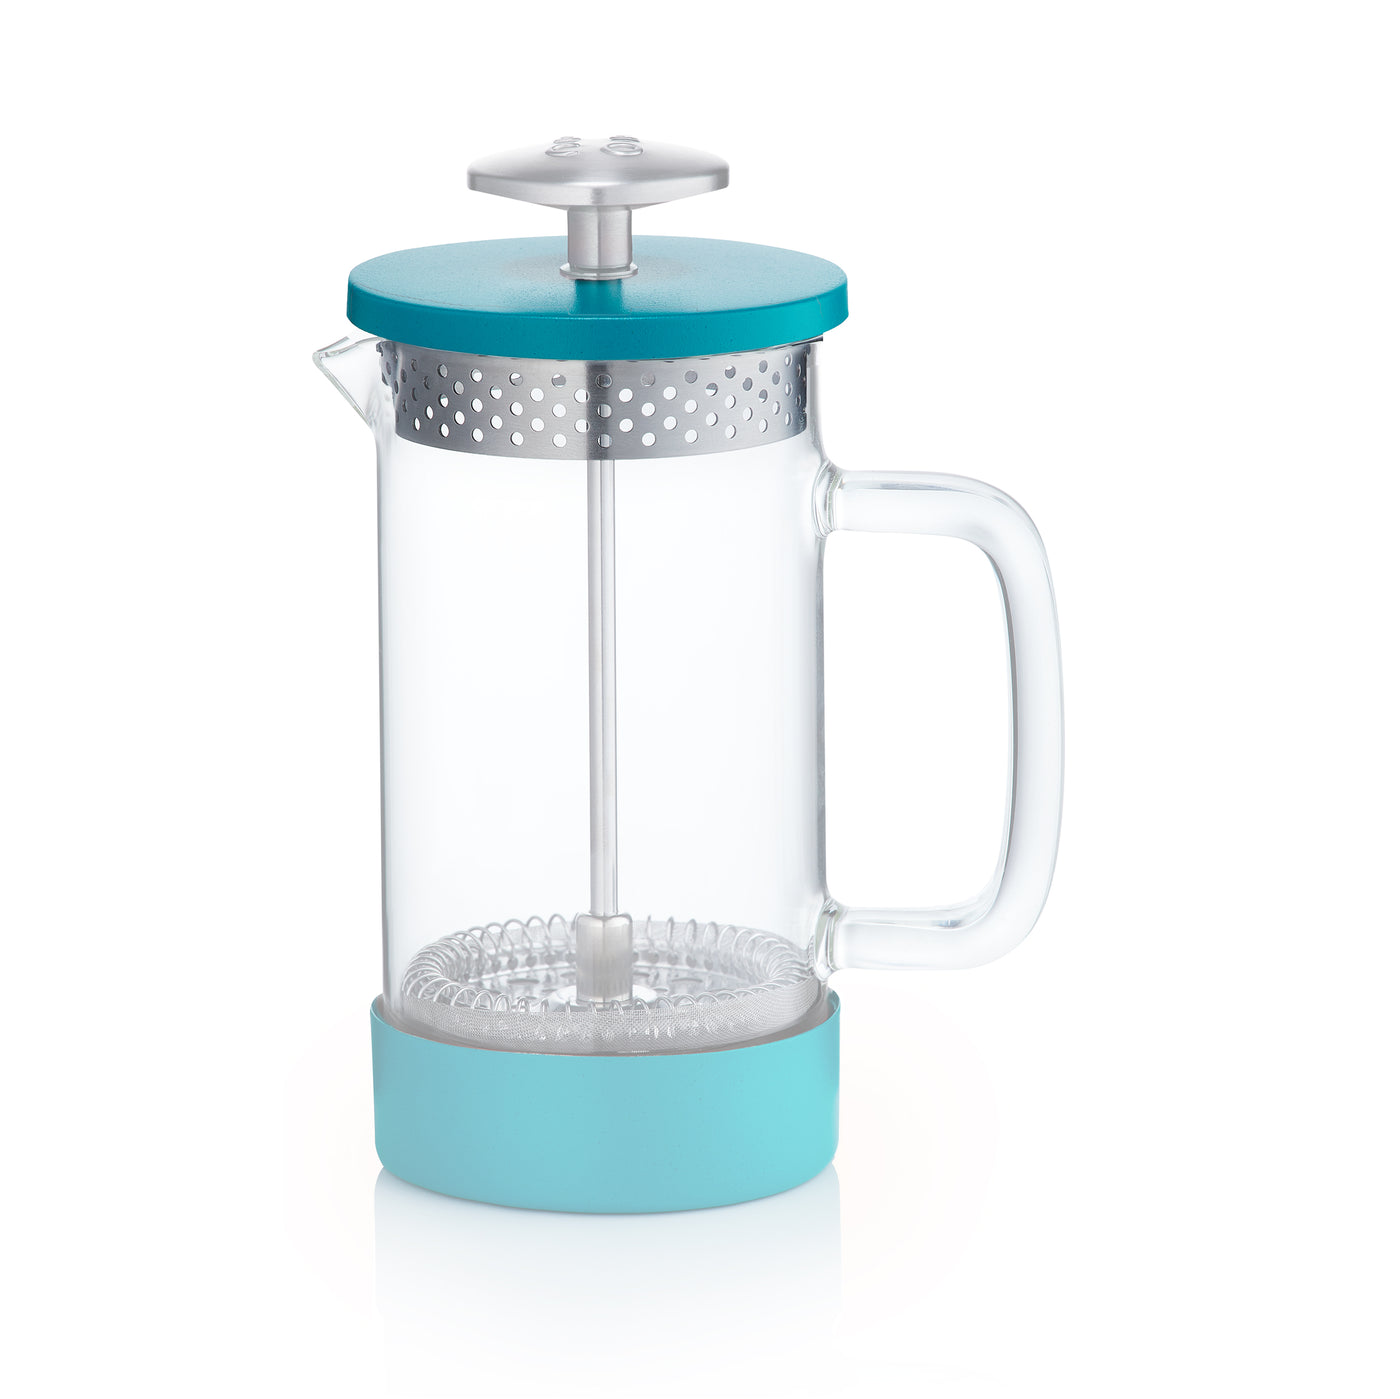 Core coffee press teal 3 cup lid replacement